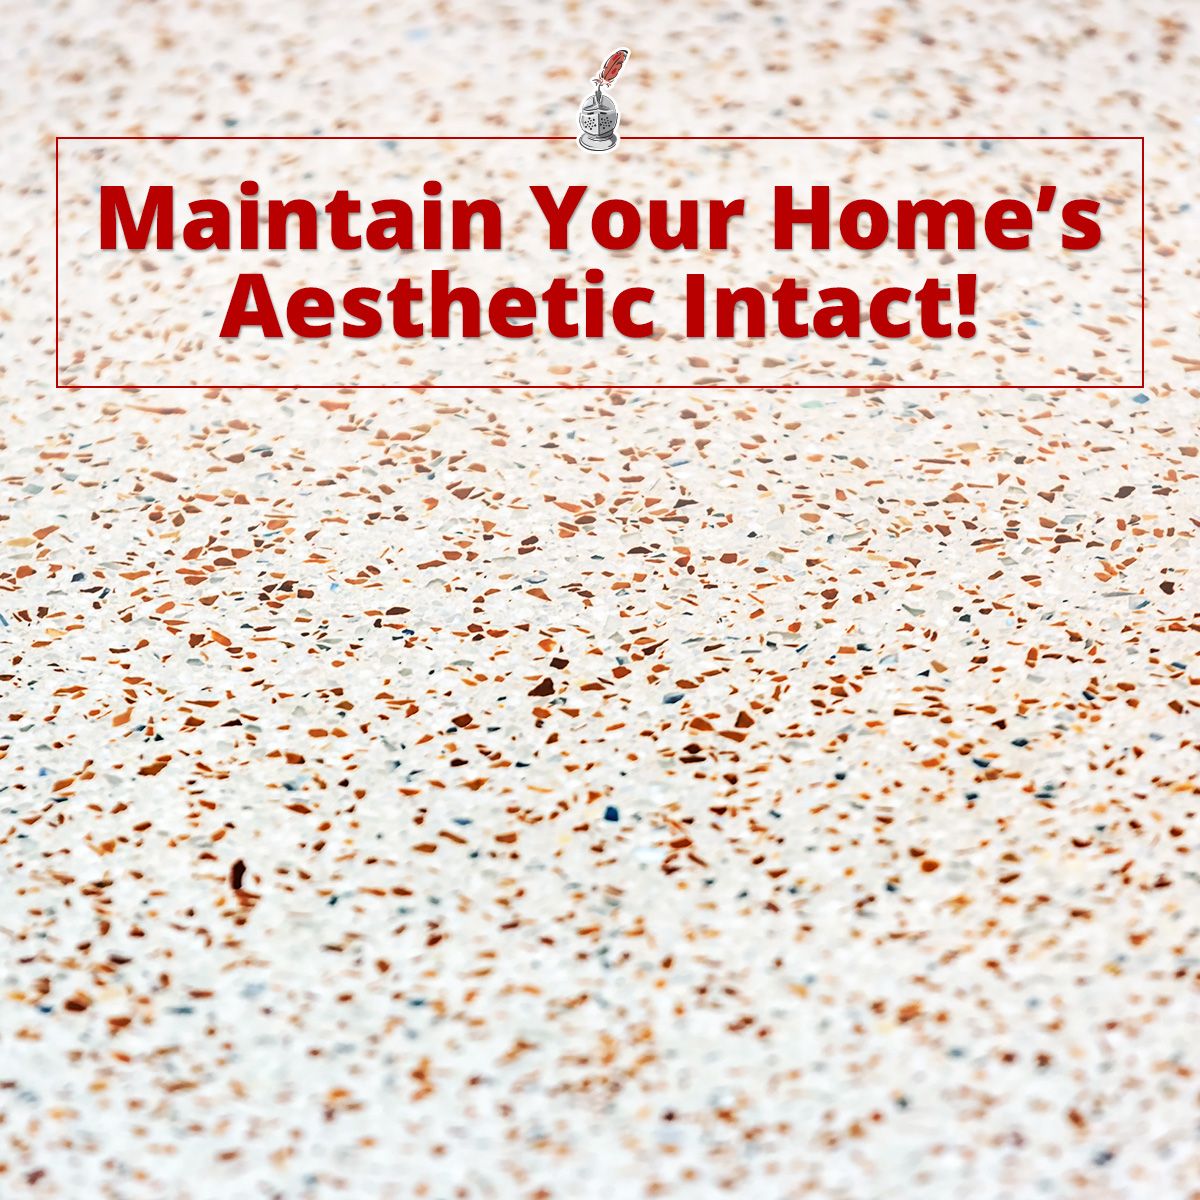 Maintain Your Home's Aesthetic Intact!